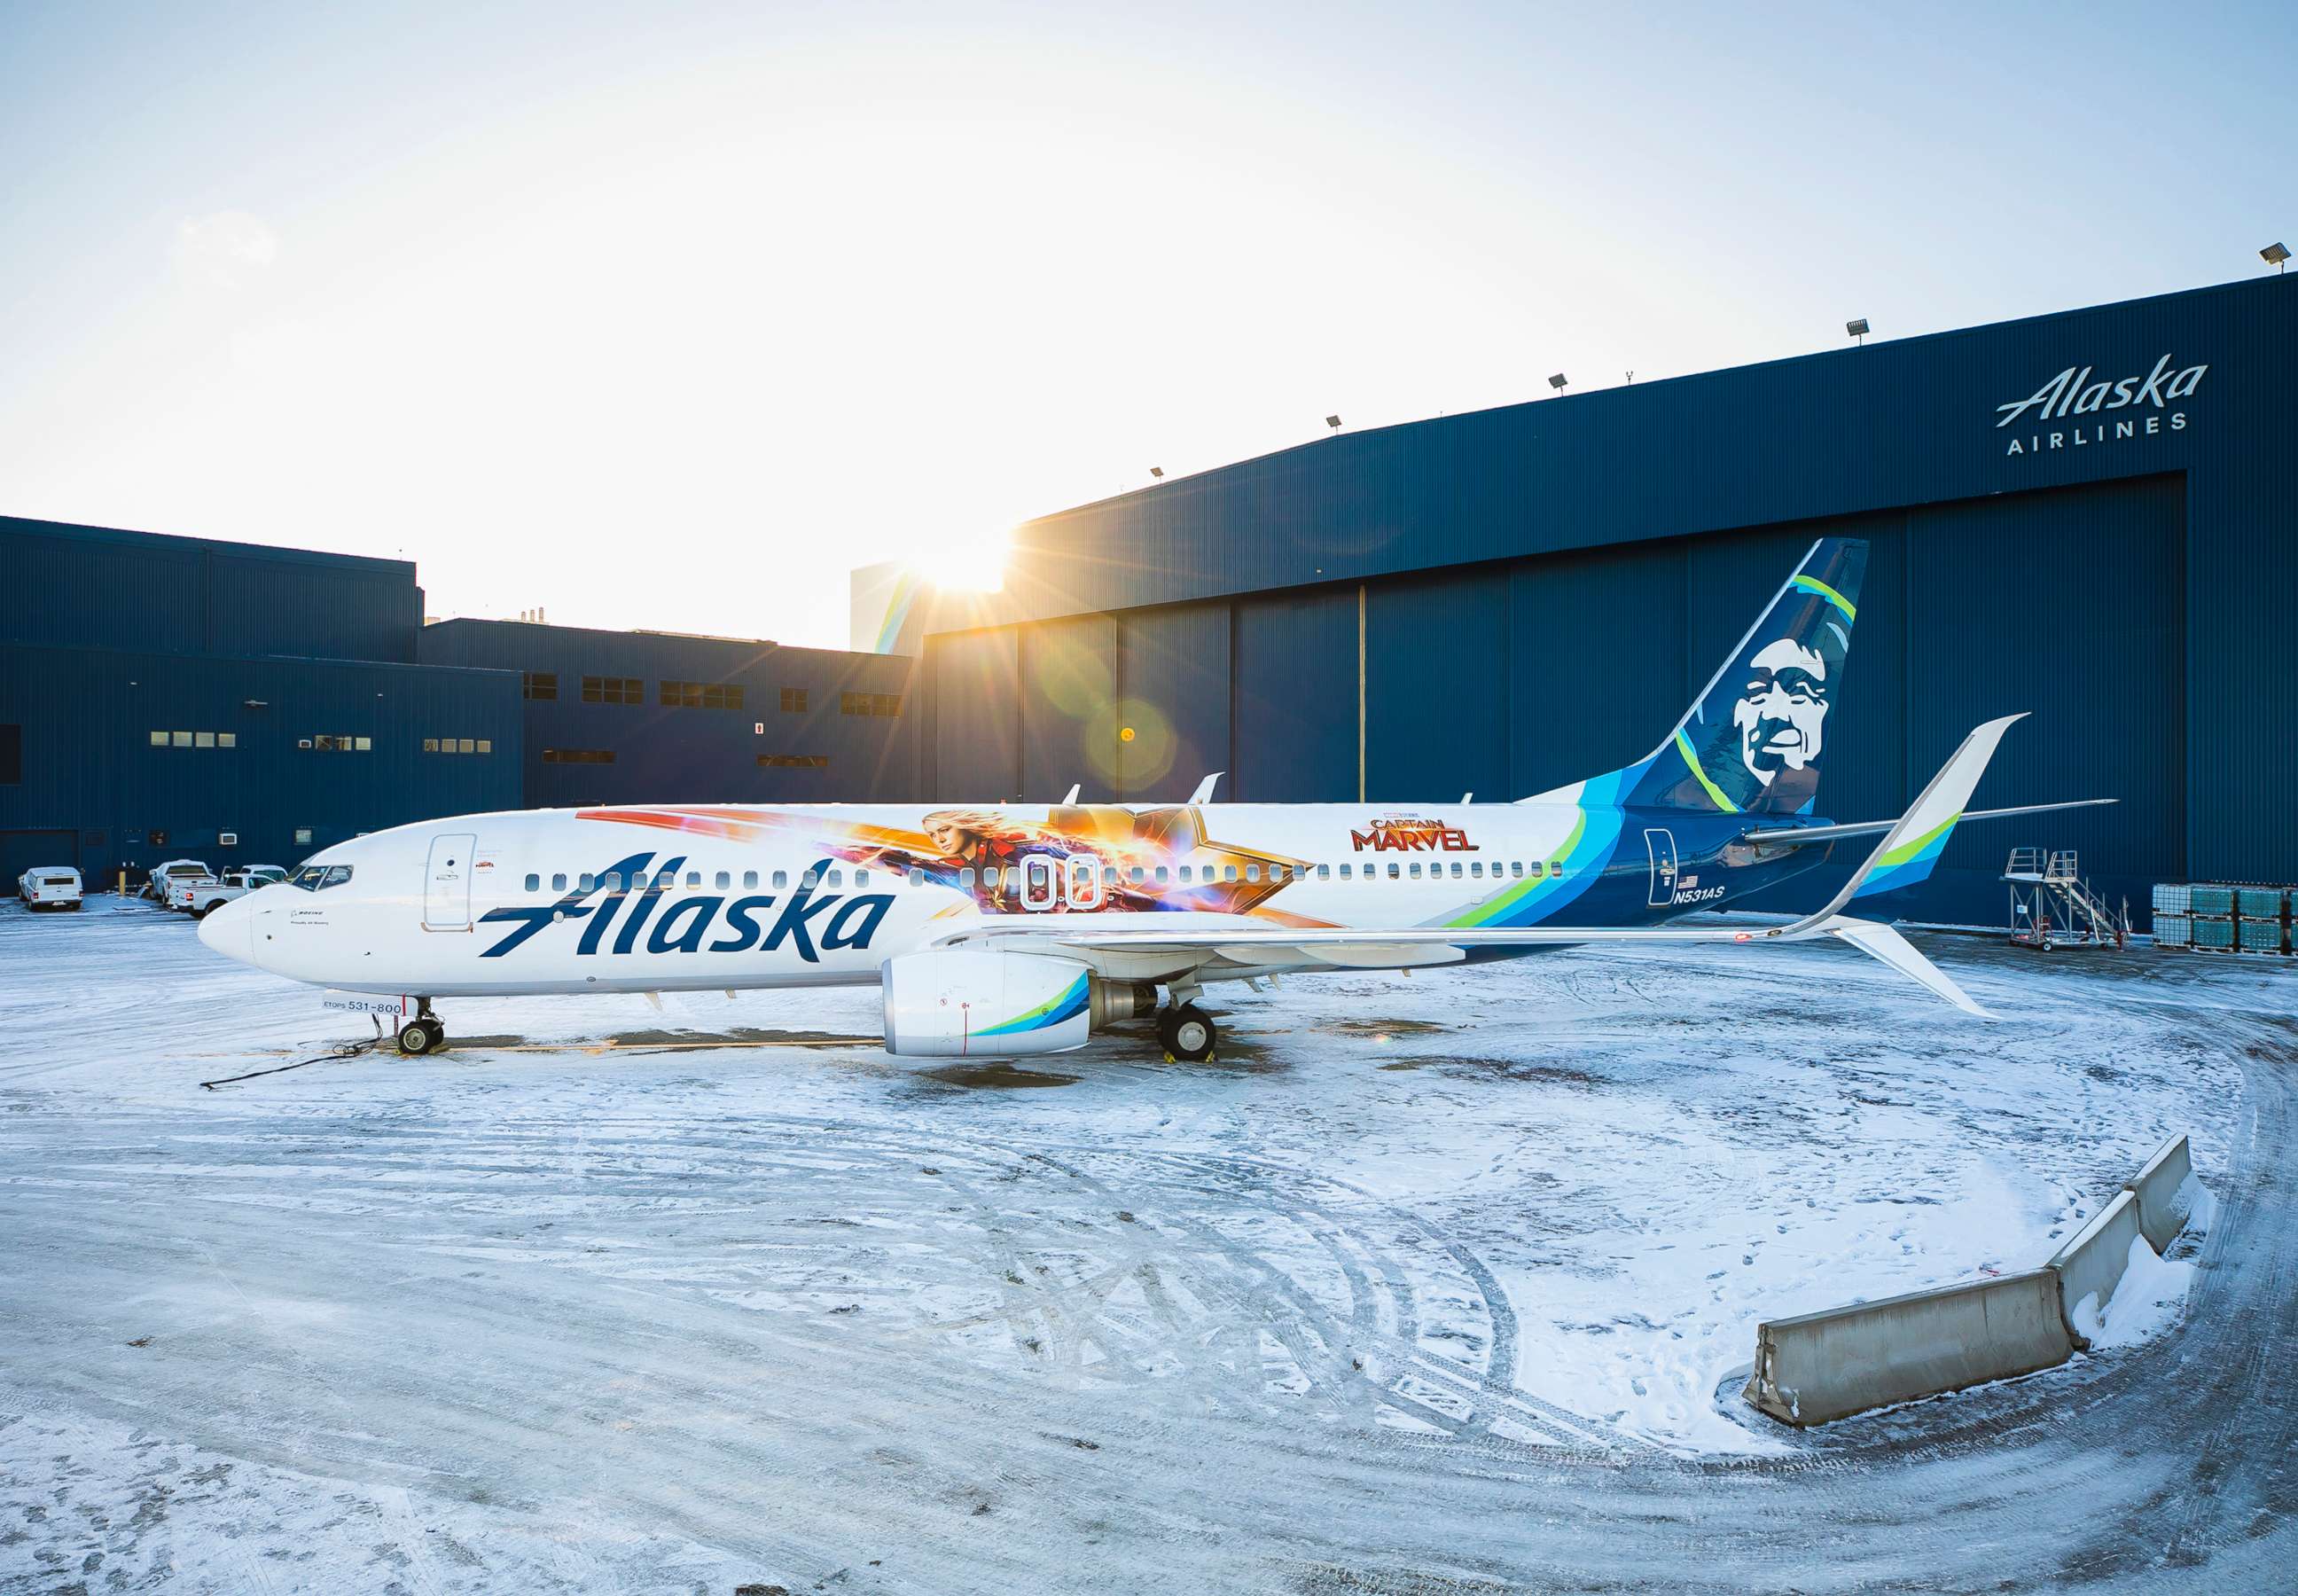 PHOTO: Alaska Airlines has unveiled a special-edition plane featuring Marvel Studios' first female super hero lead, Captain Marvel.